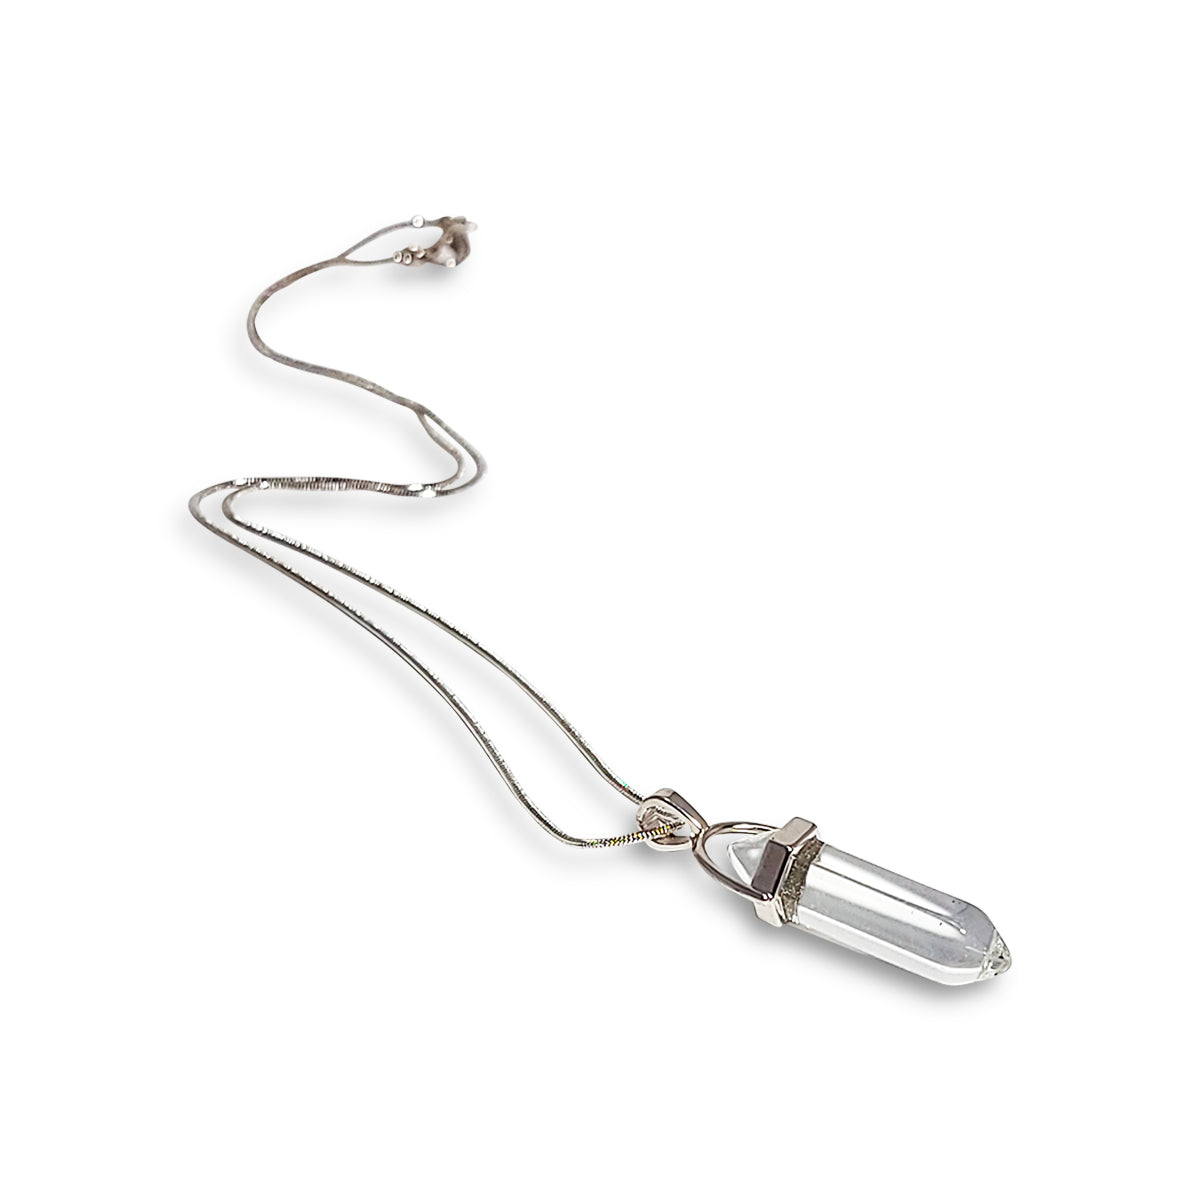 Crystal Point Pillar Necklace - Silver